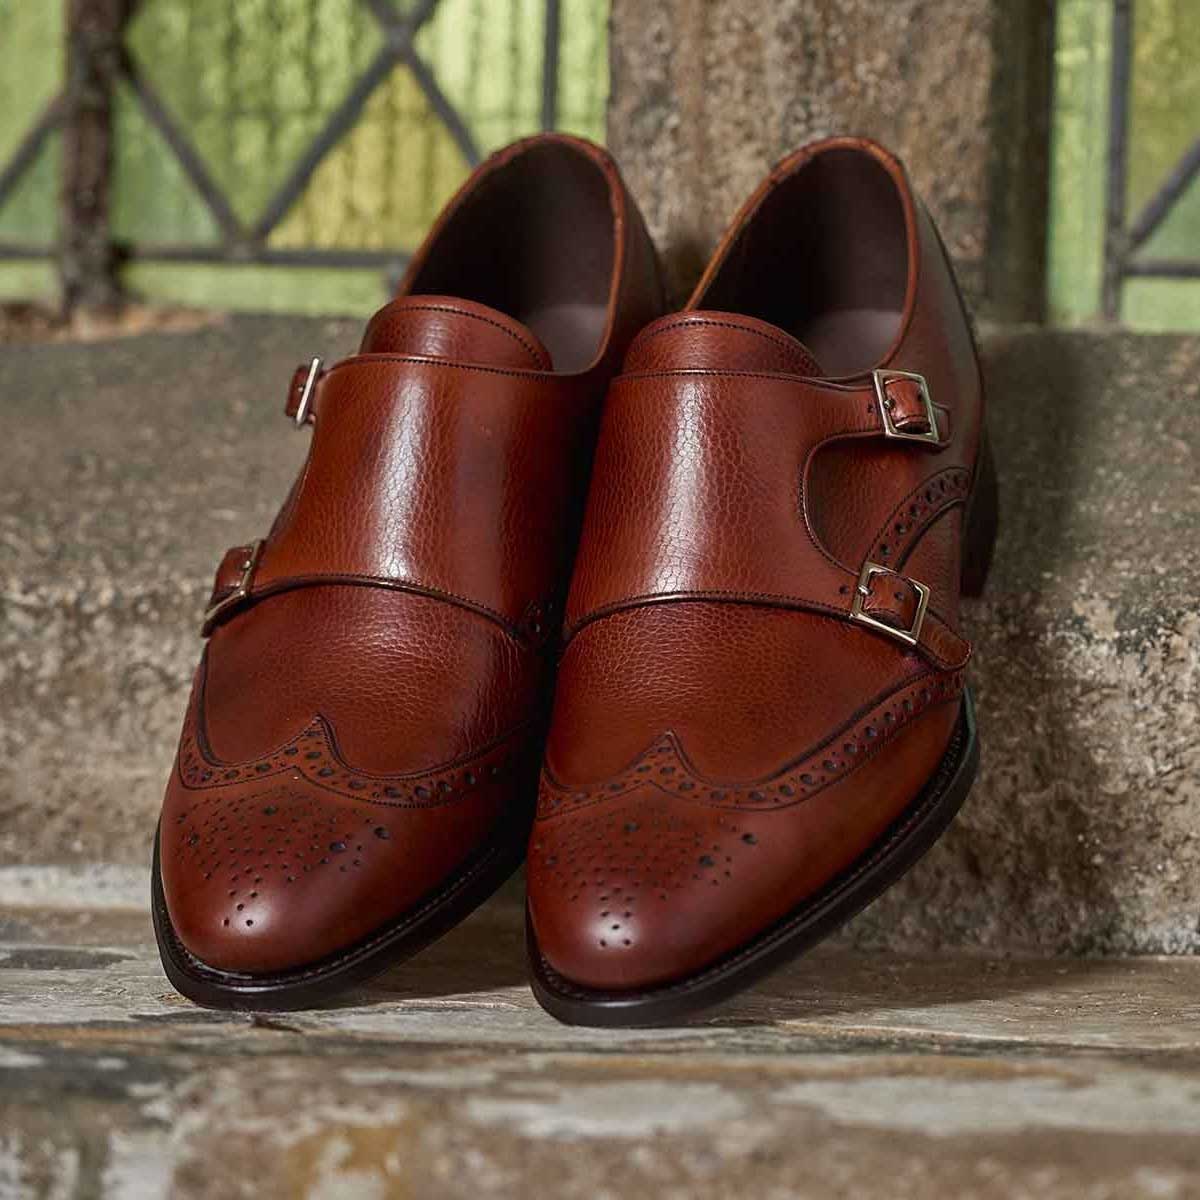 Barker Shoes Handcrafted Leather Sole